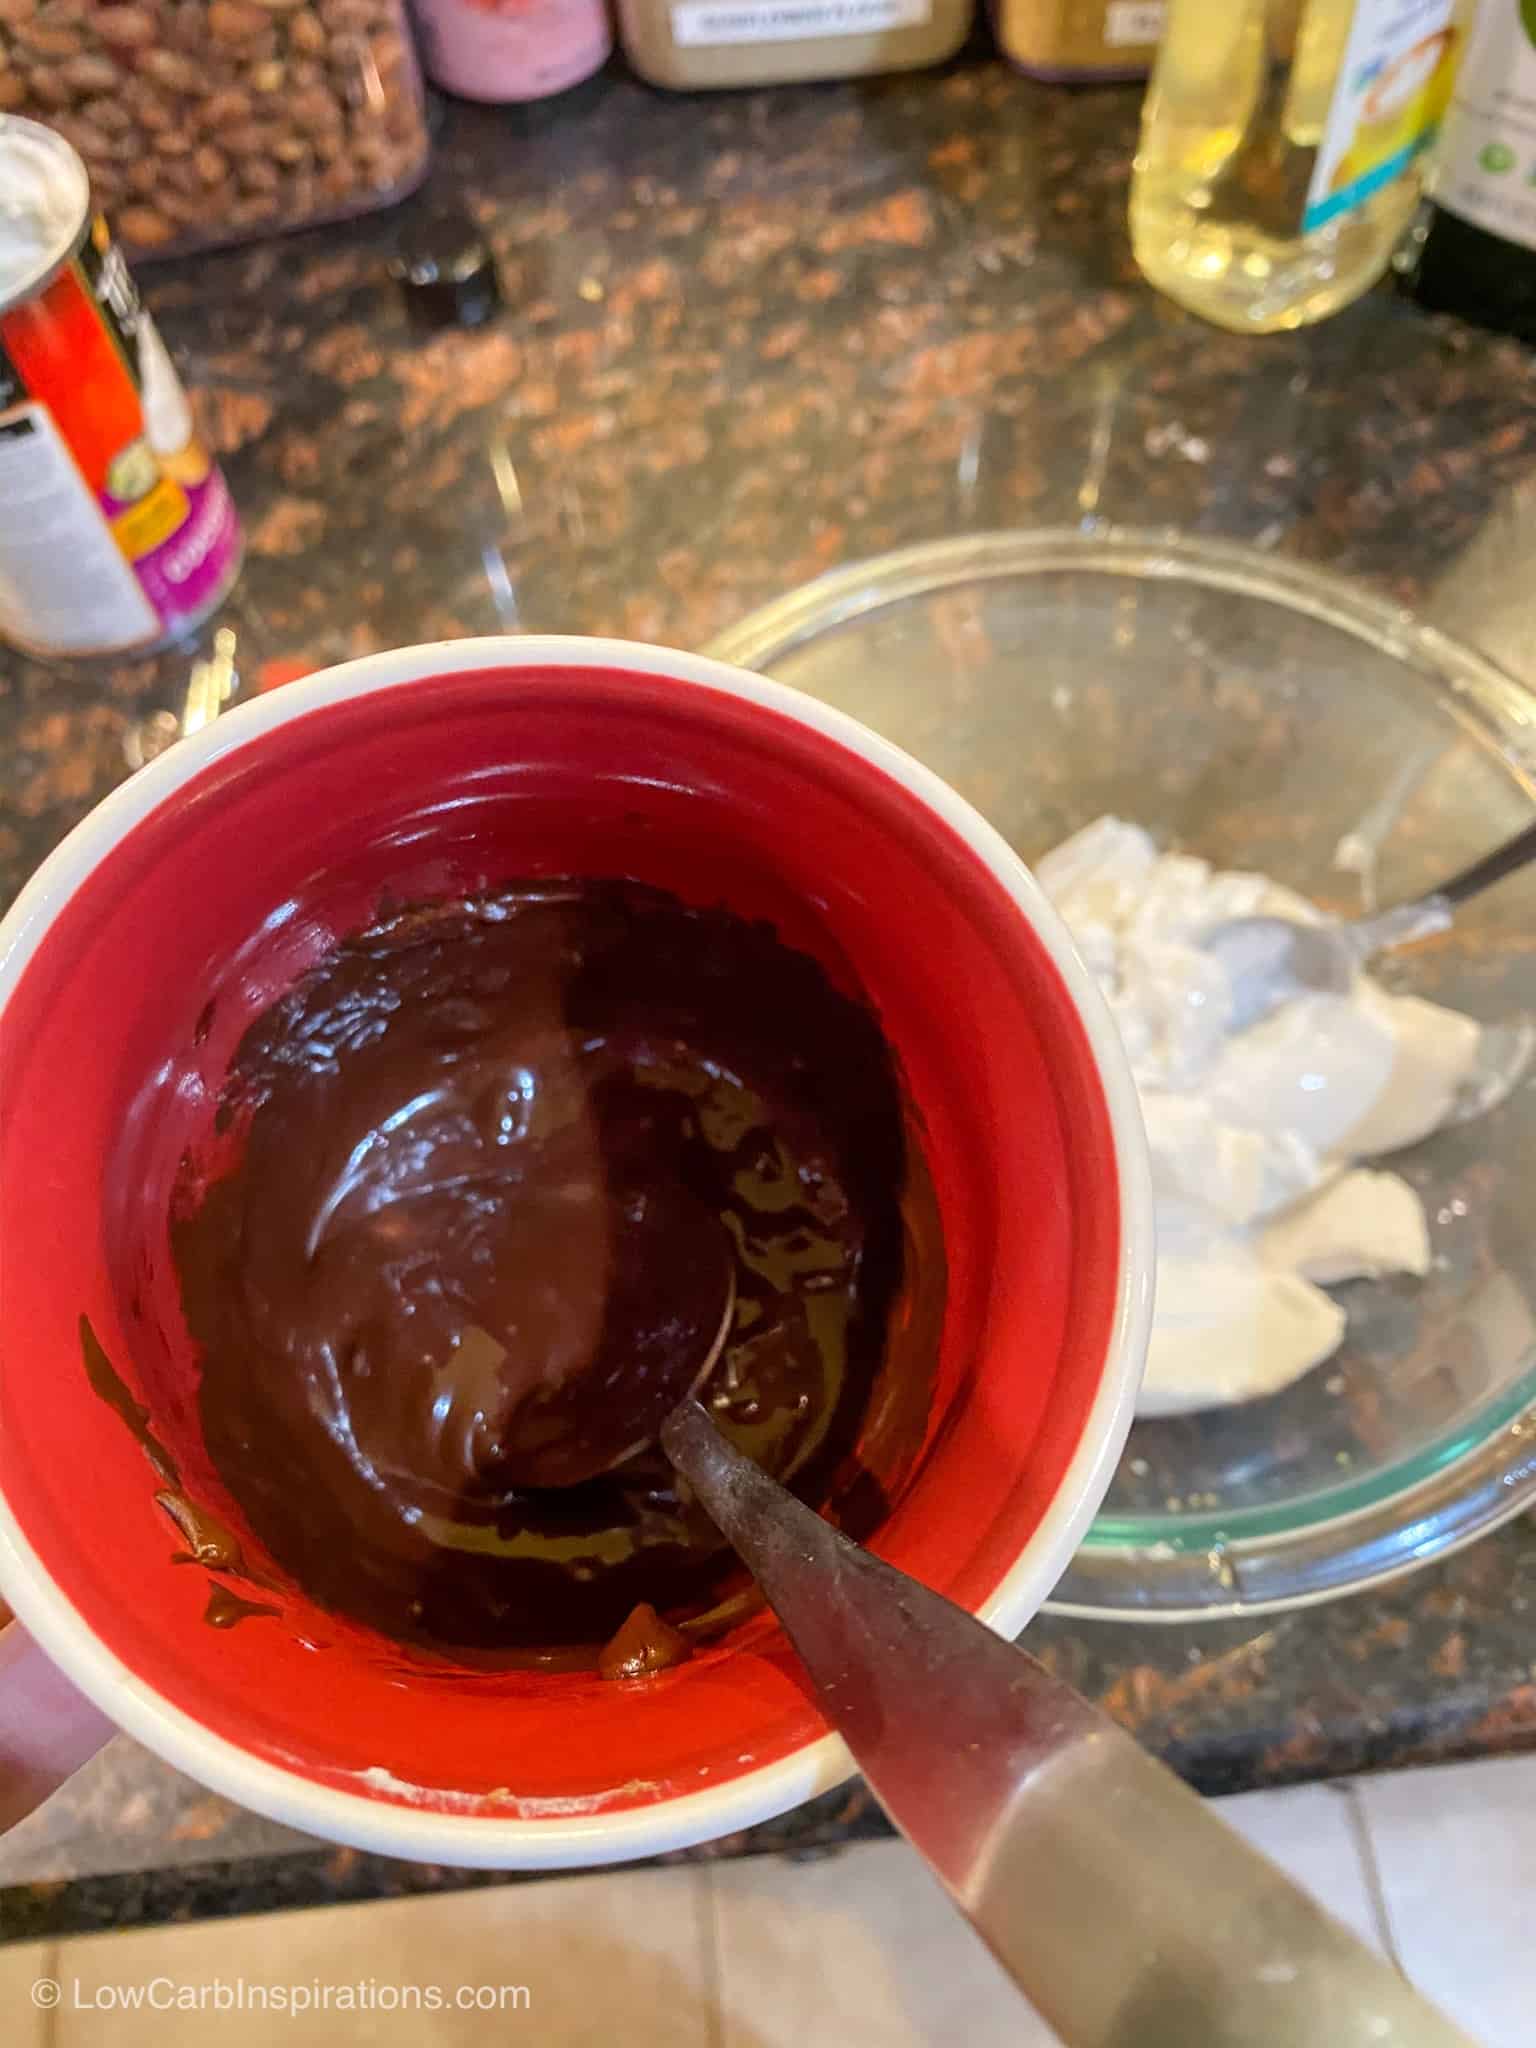 Melted chocolate in a mug cup